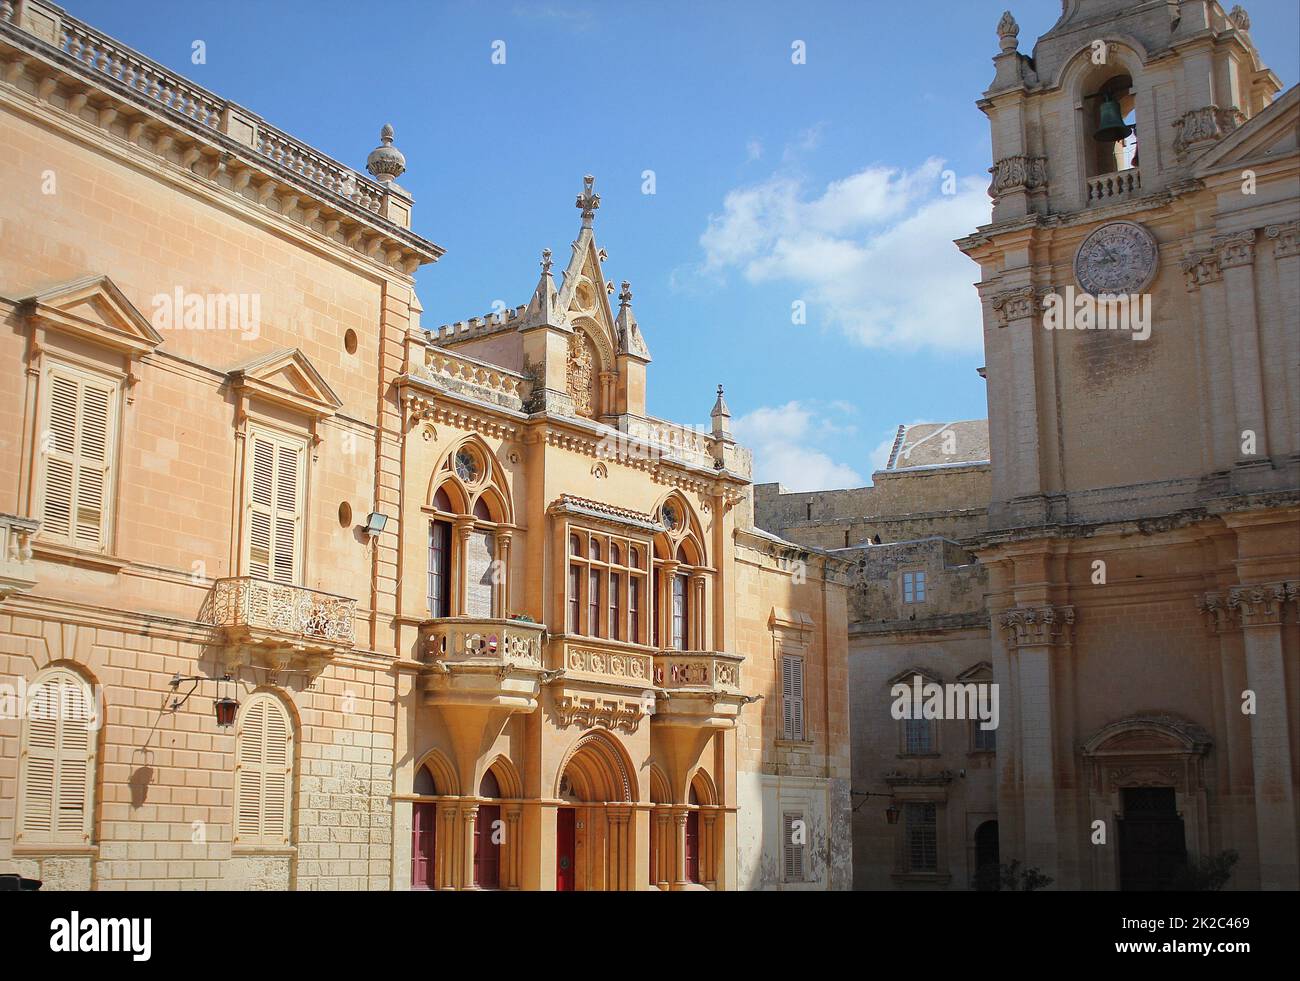 House facade at St. Pauls's Square and St. Paul's Cathedral in Mdina, Malta Stock Photo